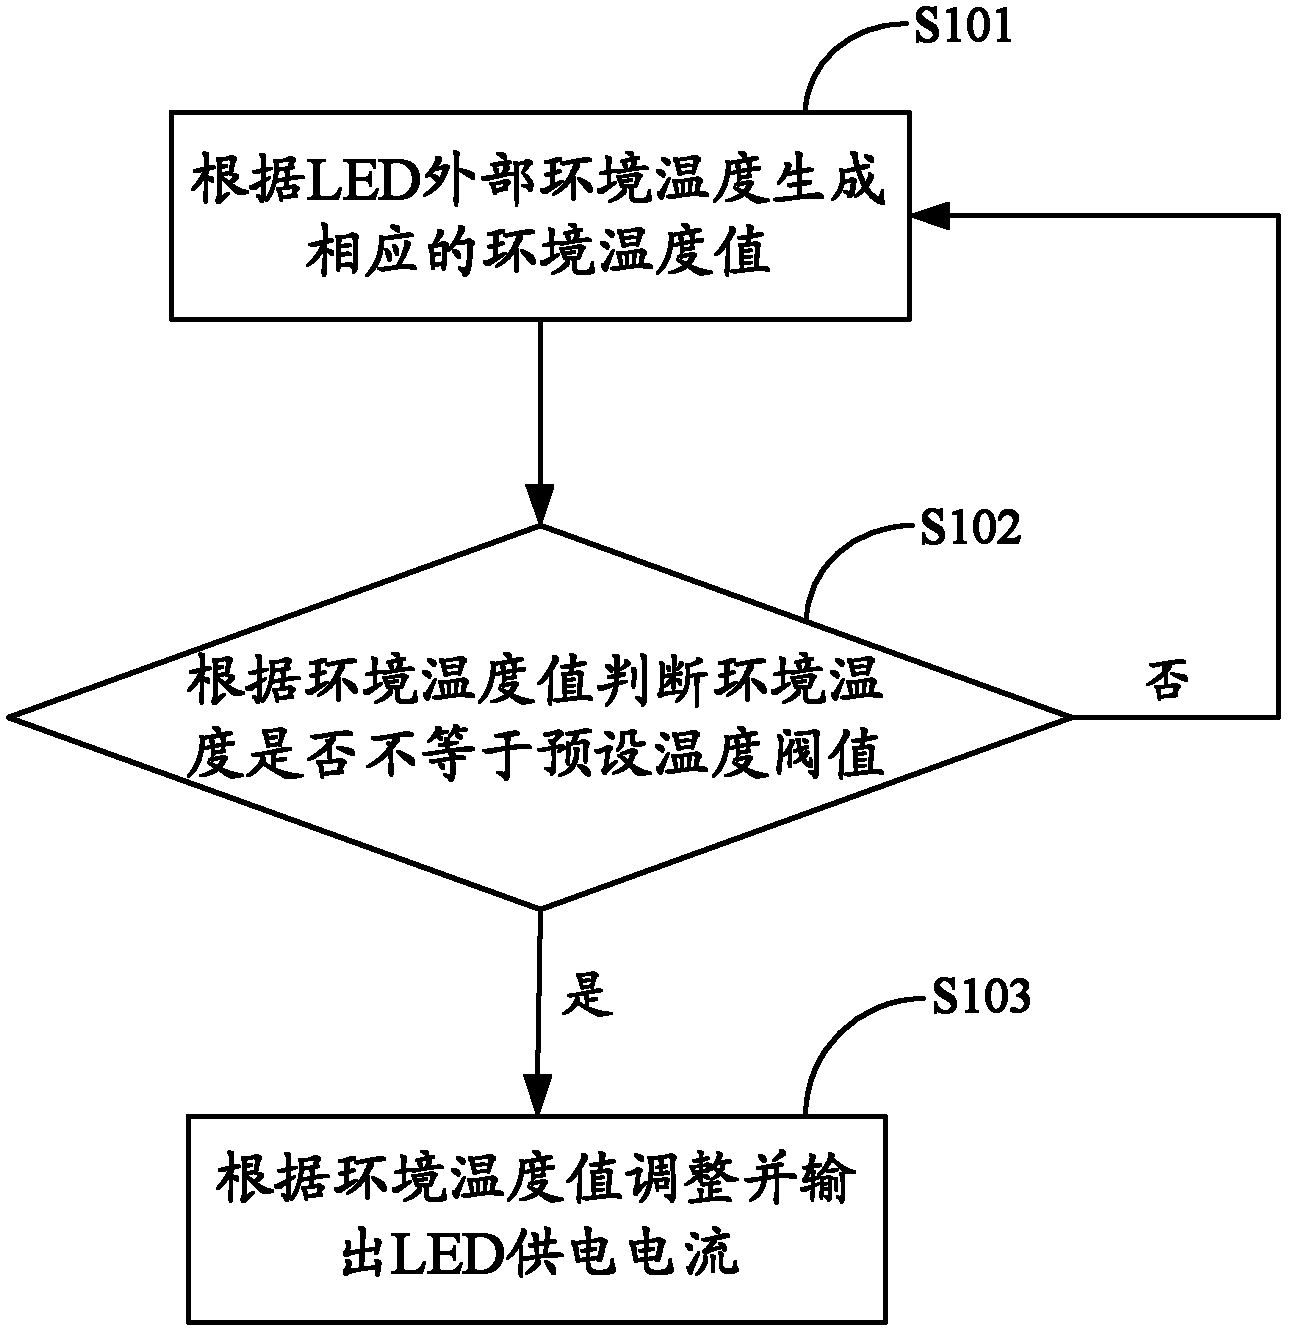 LED (light-emitting-diode) driving method and device